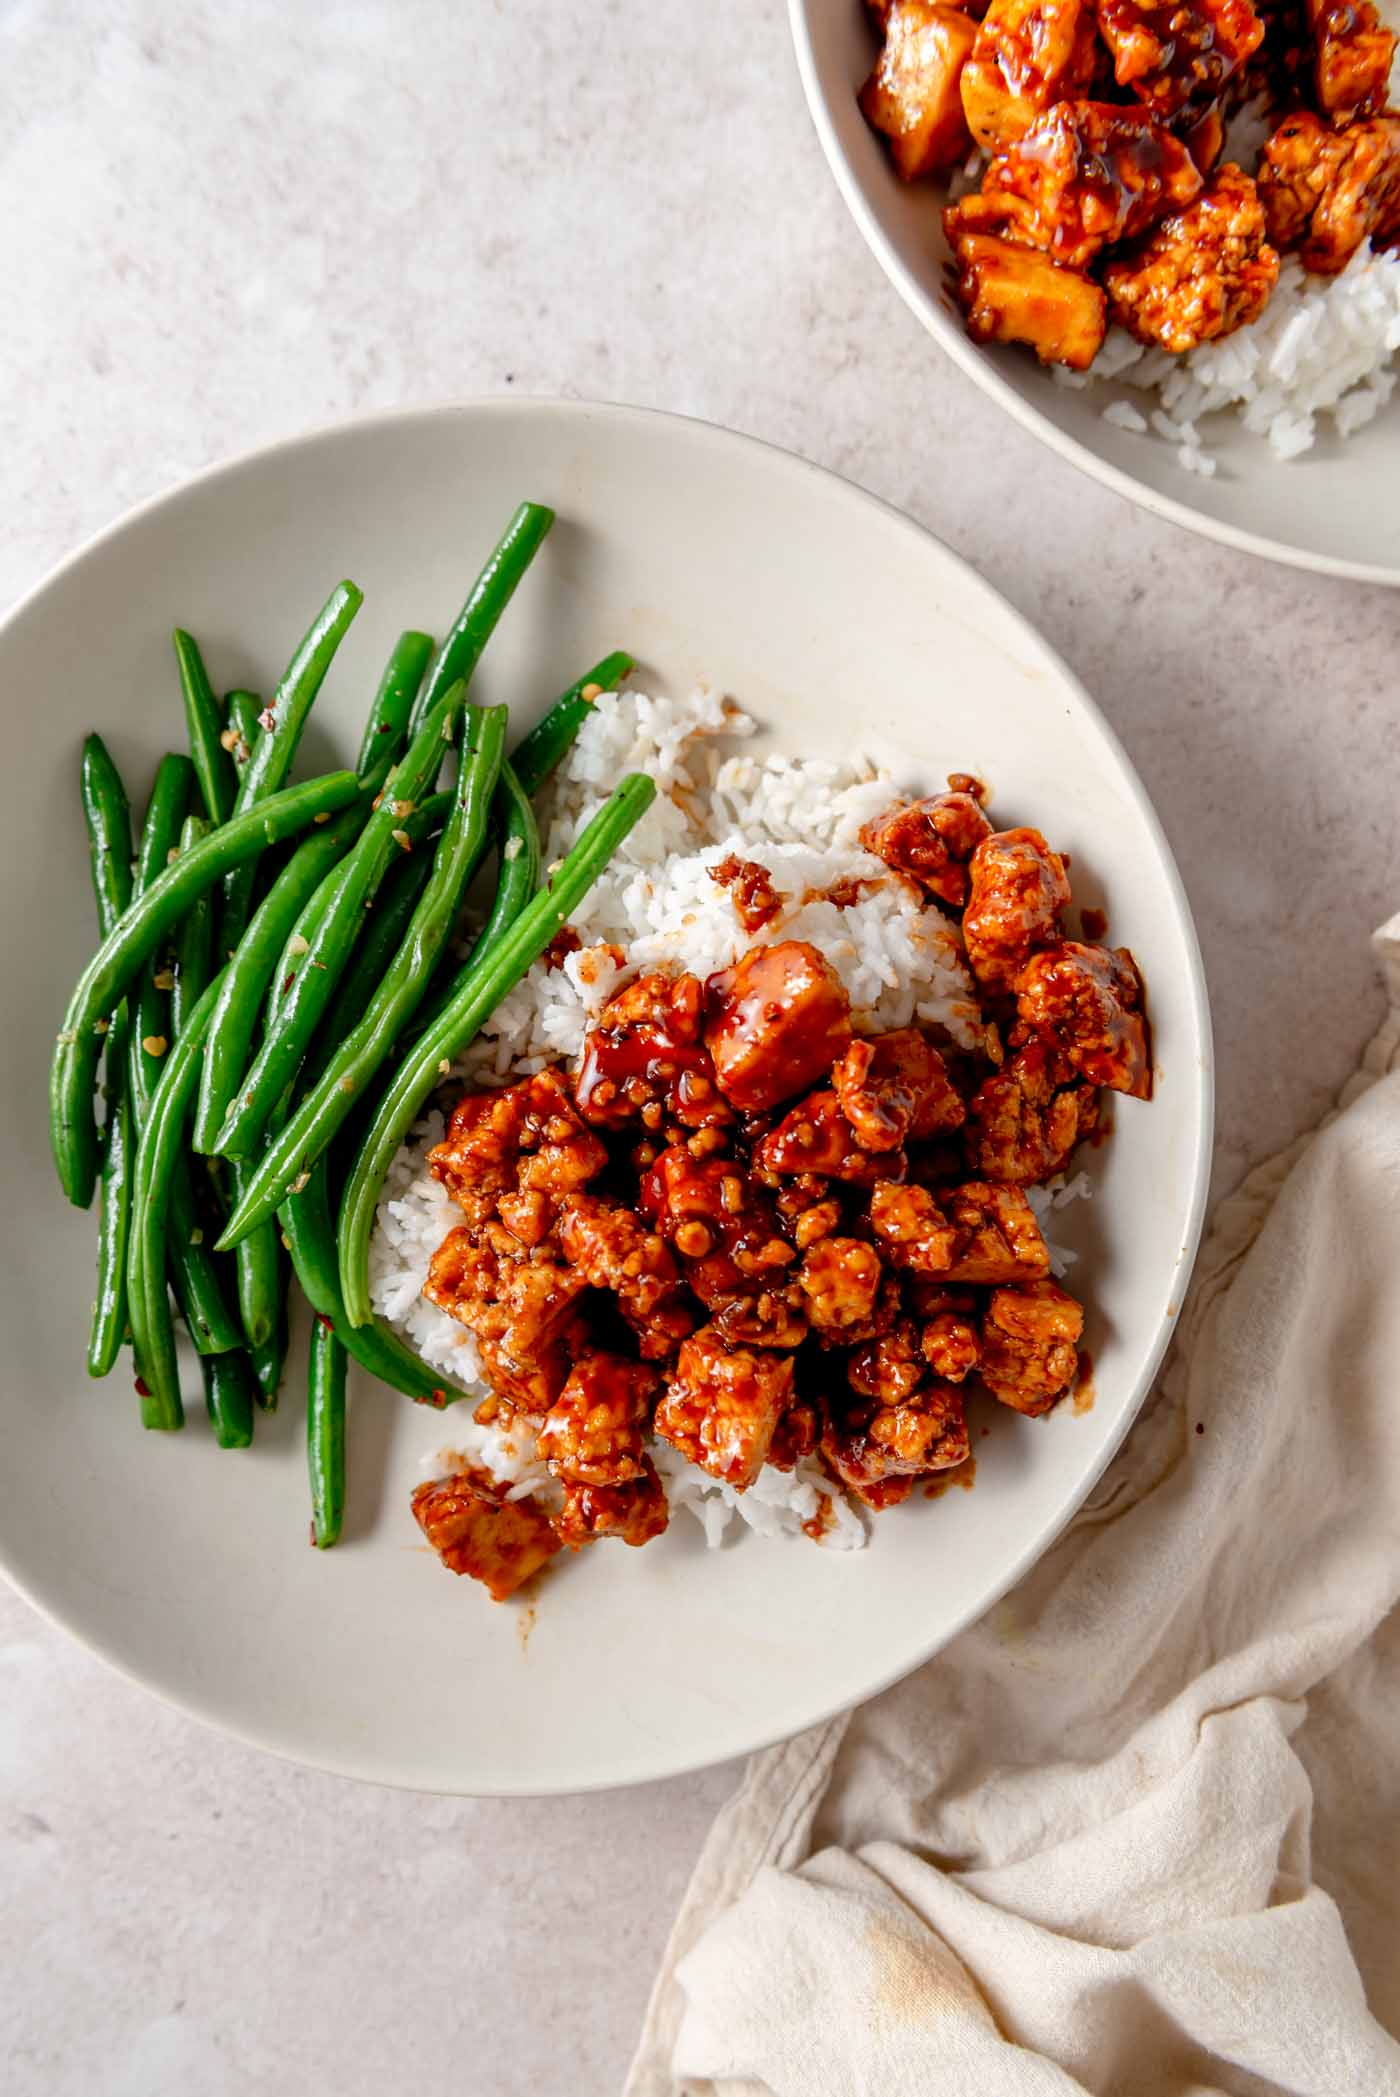 Tofu cubes tossed in a gochujang sauce over rice with a serving of green beans in a bowl.